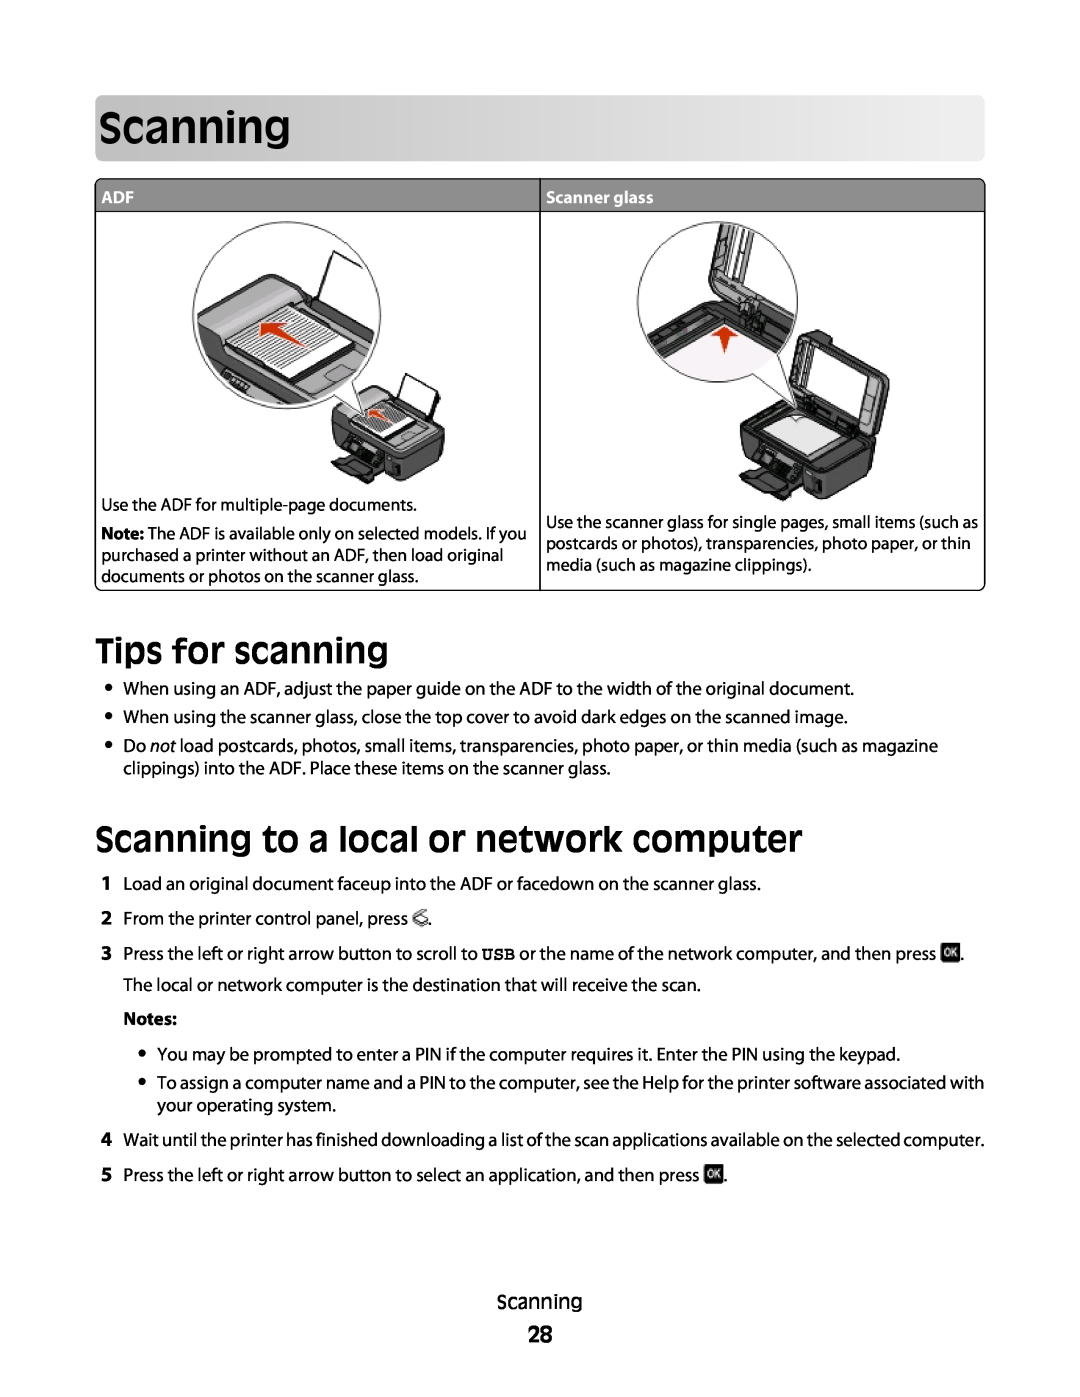 Lexmark Pro205, Pro208, Pro207 manual Tips for scanning, Scanning to a local or network computer, Notes 